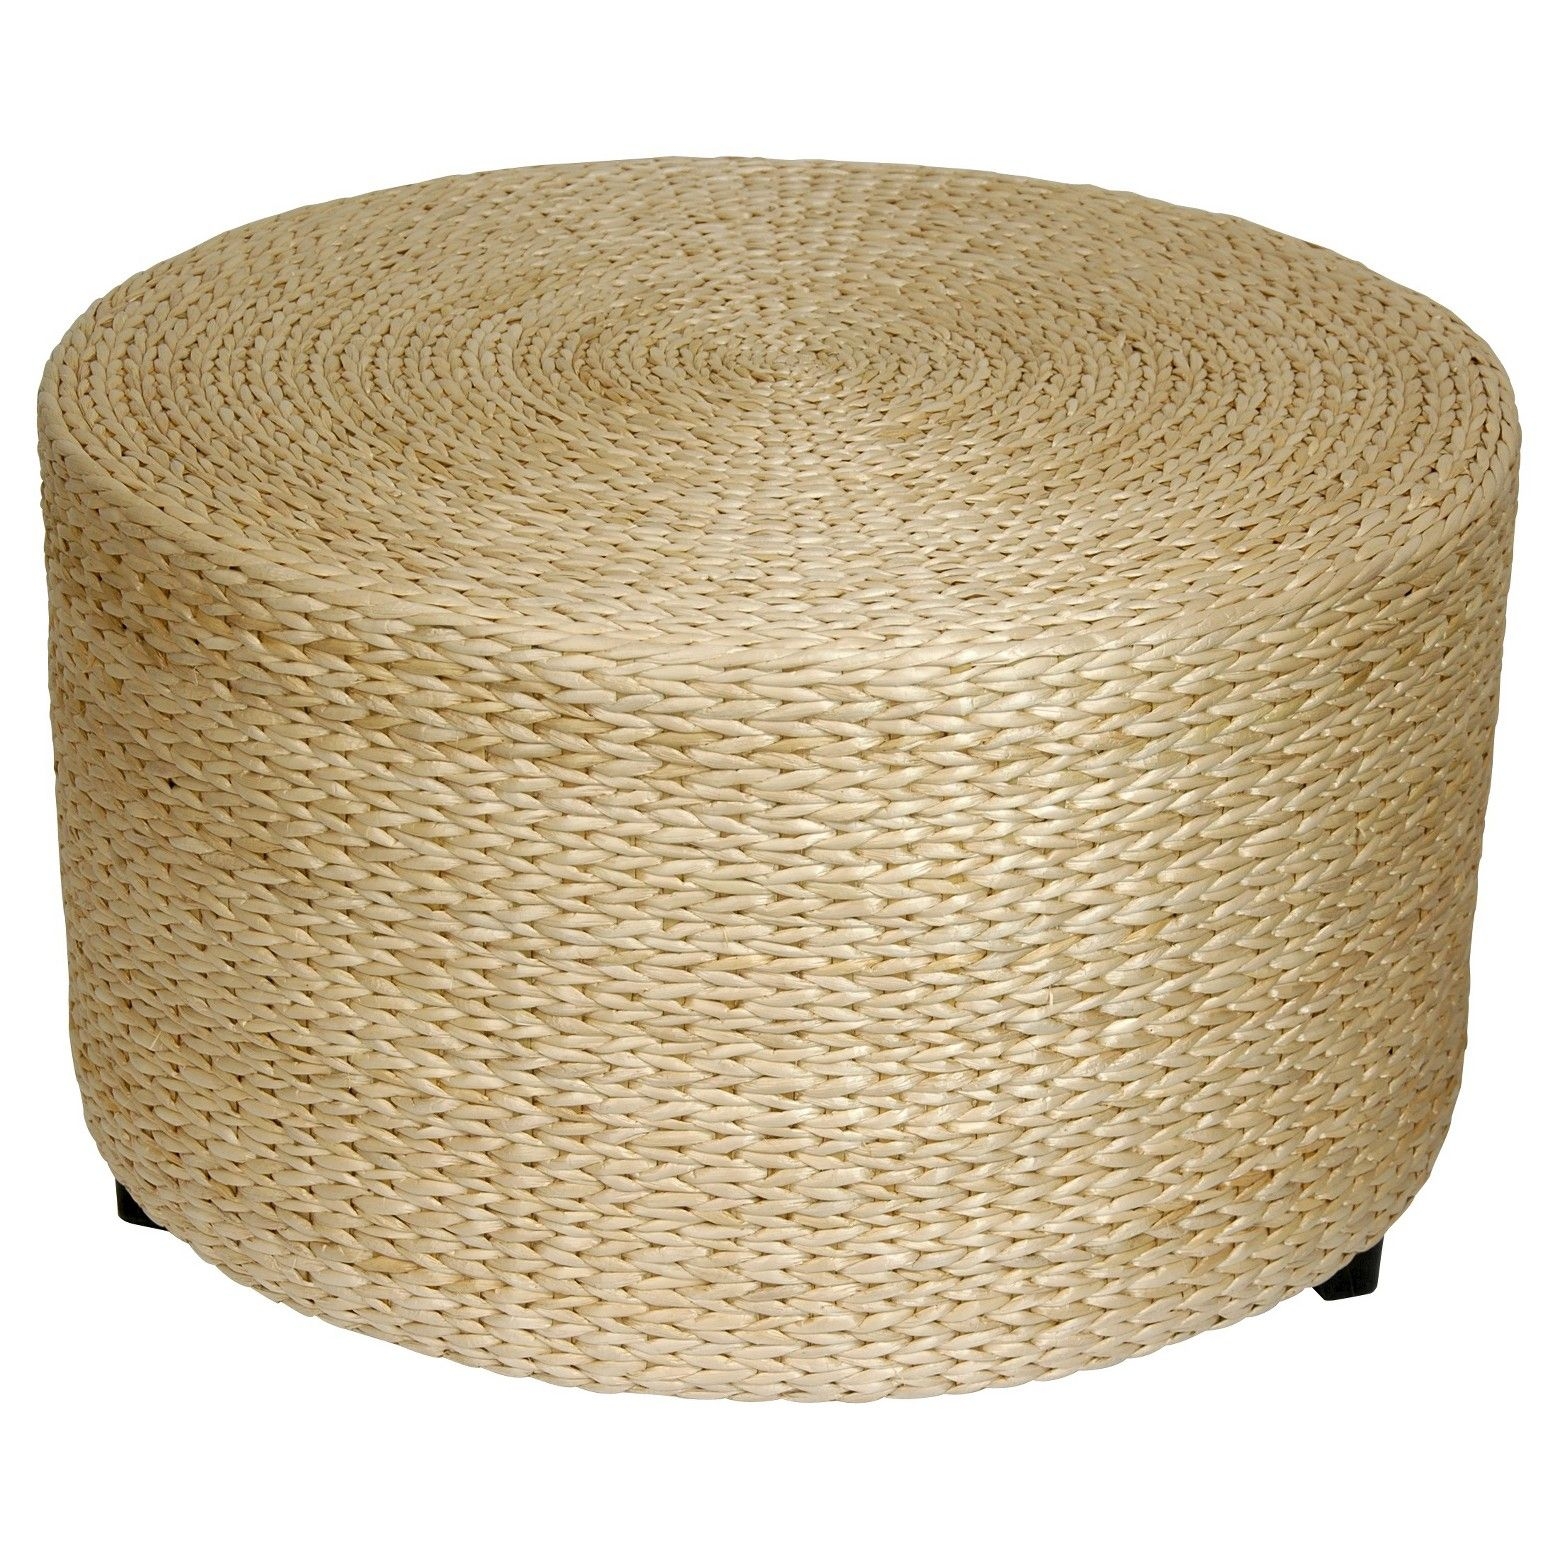 Coffee table foot stool 30 woven water hyacinth rattan style